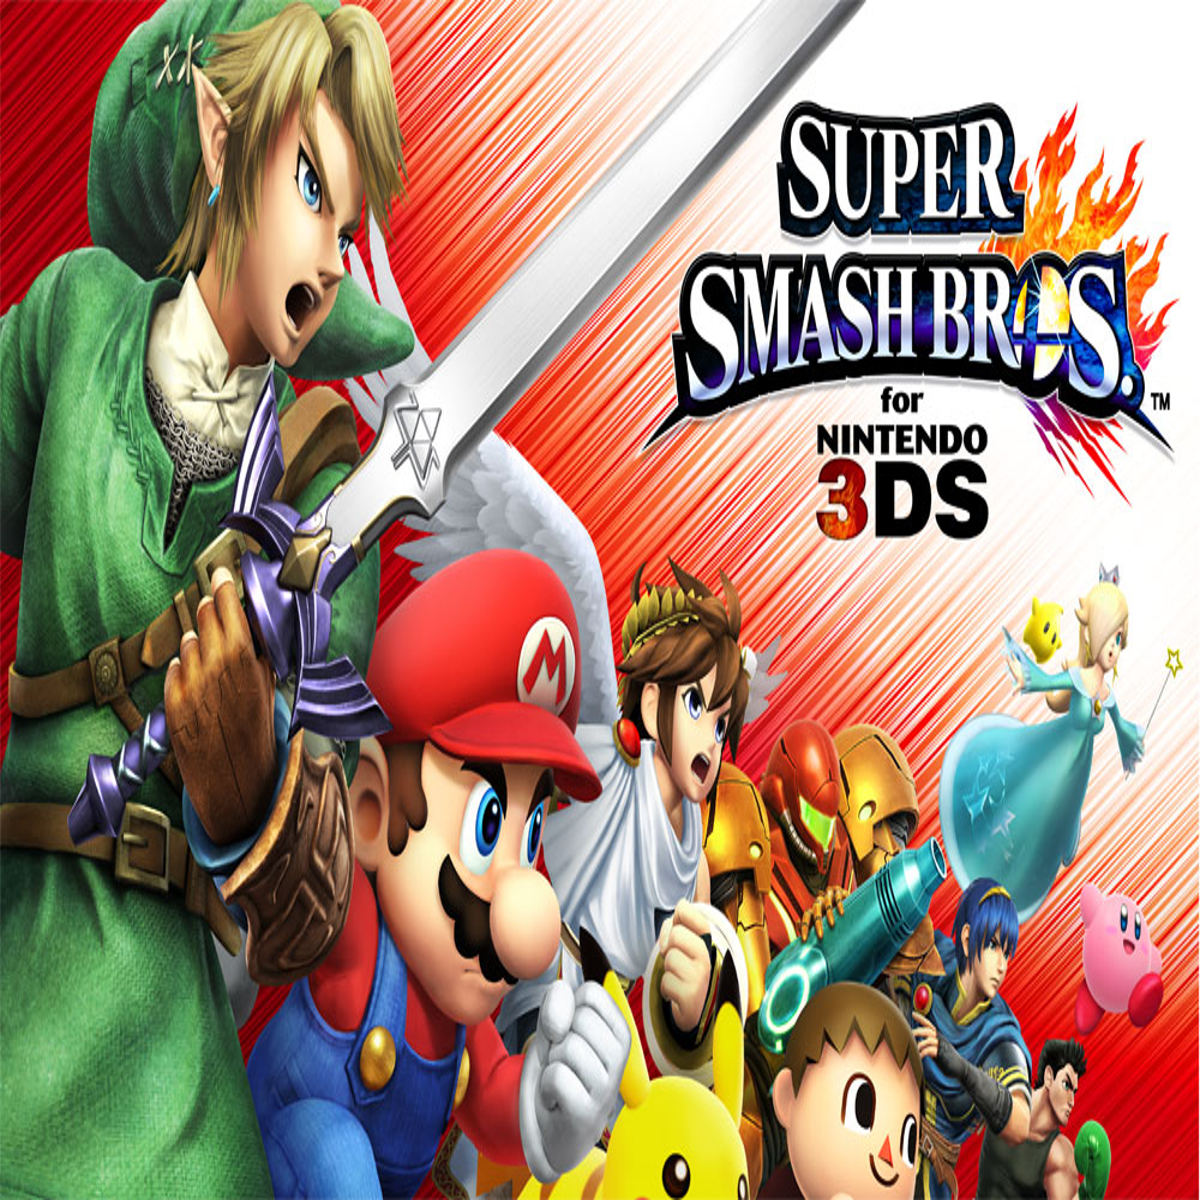 Super Smash Bros. and online play aren't a 'good fit' for each